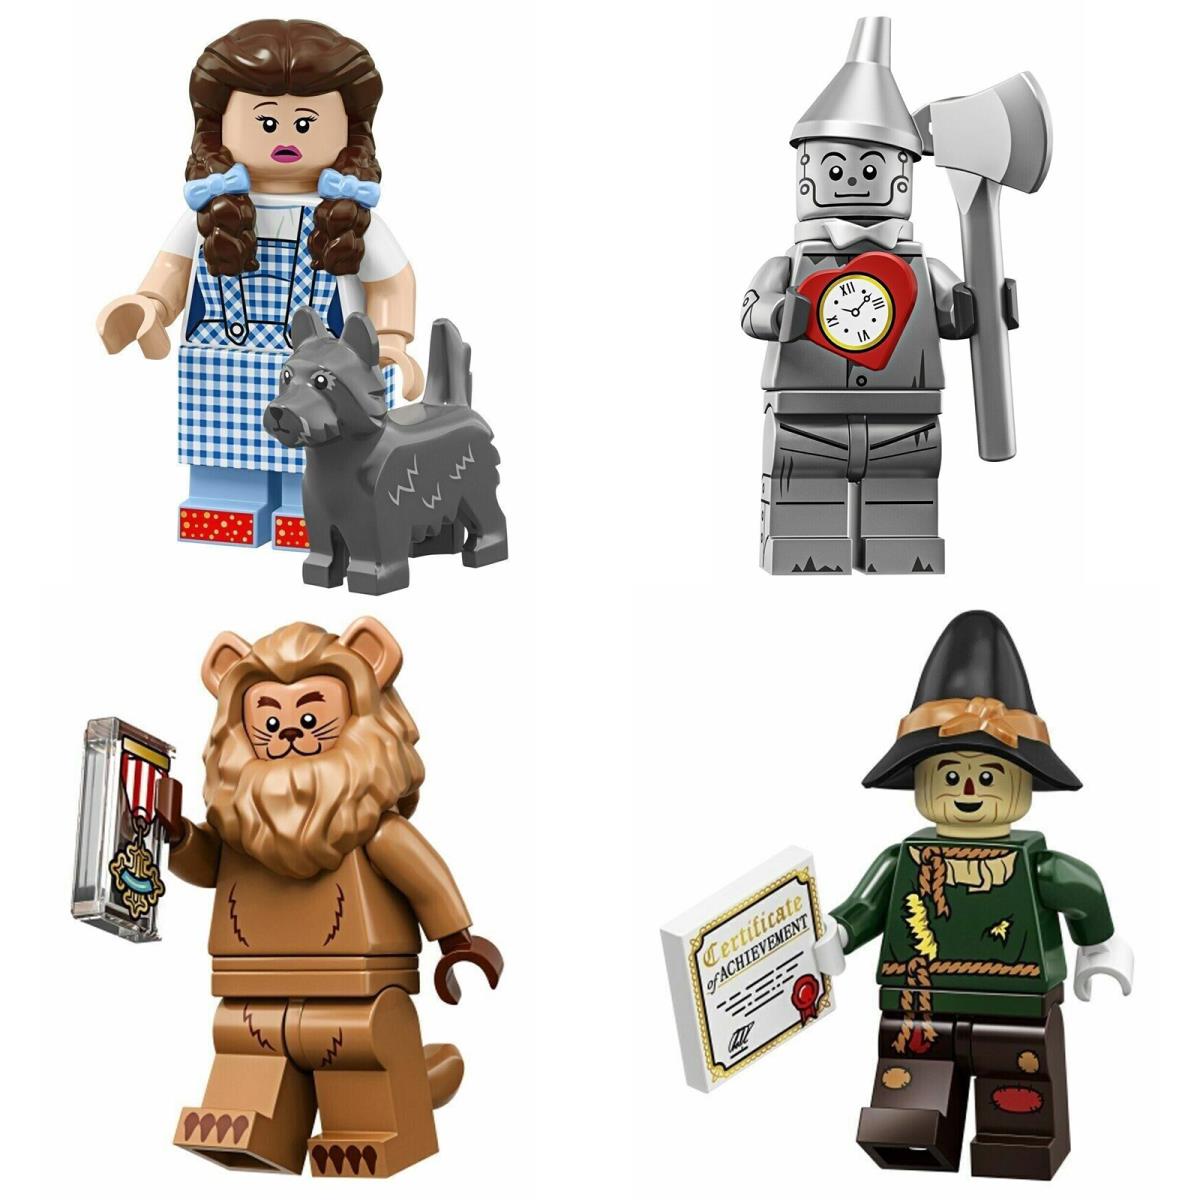 Lego Wizard of Oz Minifigures Complete Set of 4 The Lego Movie Series 2